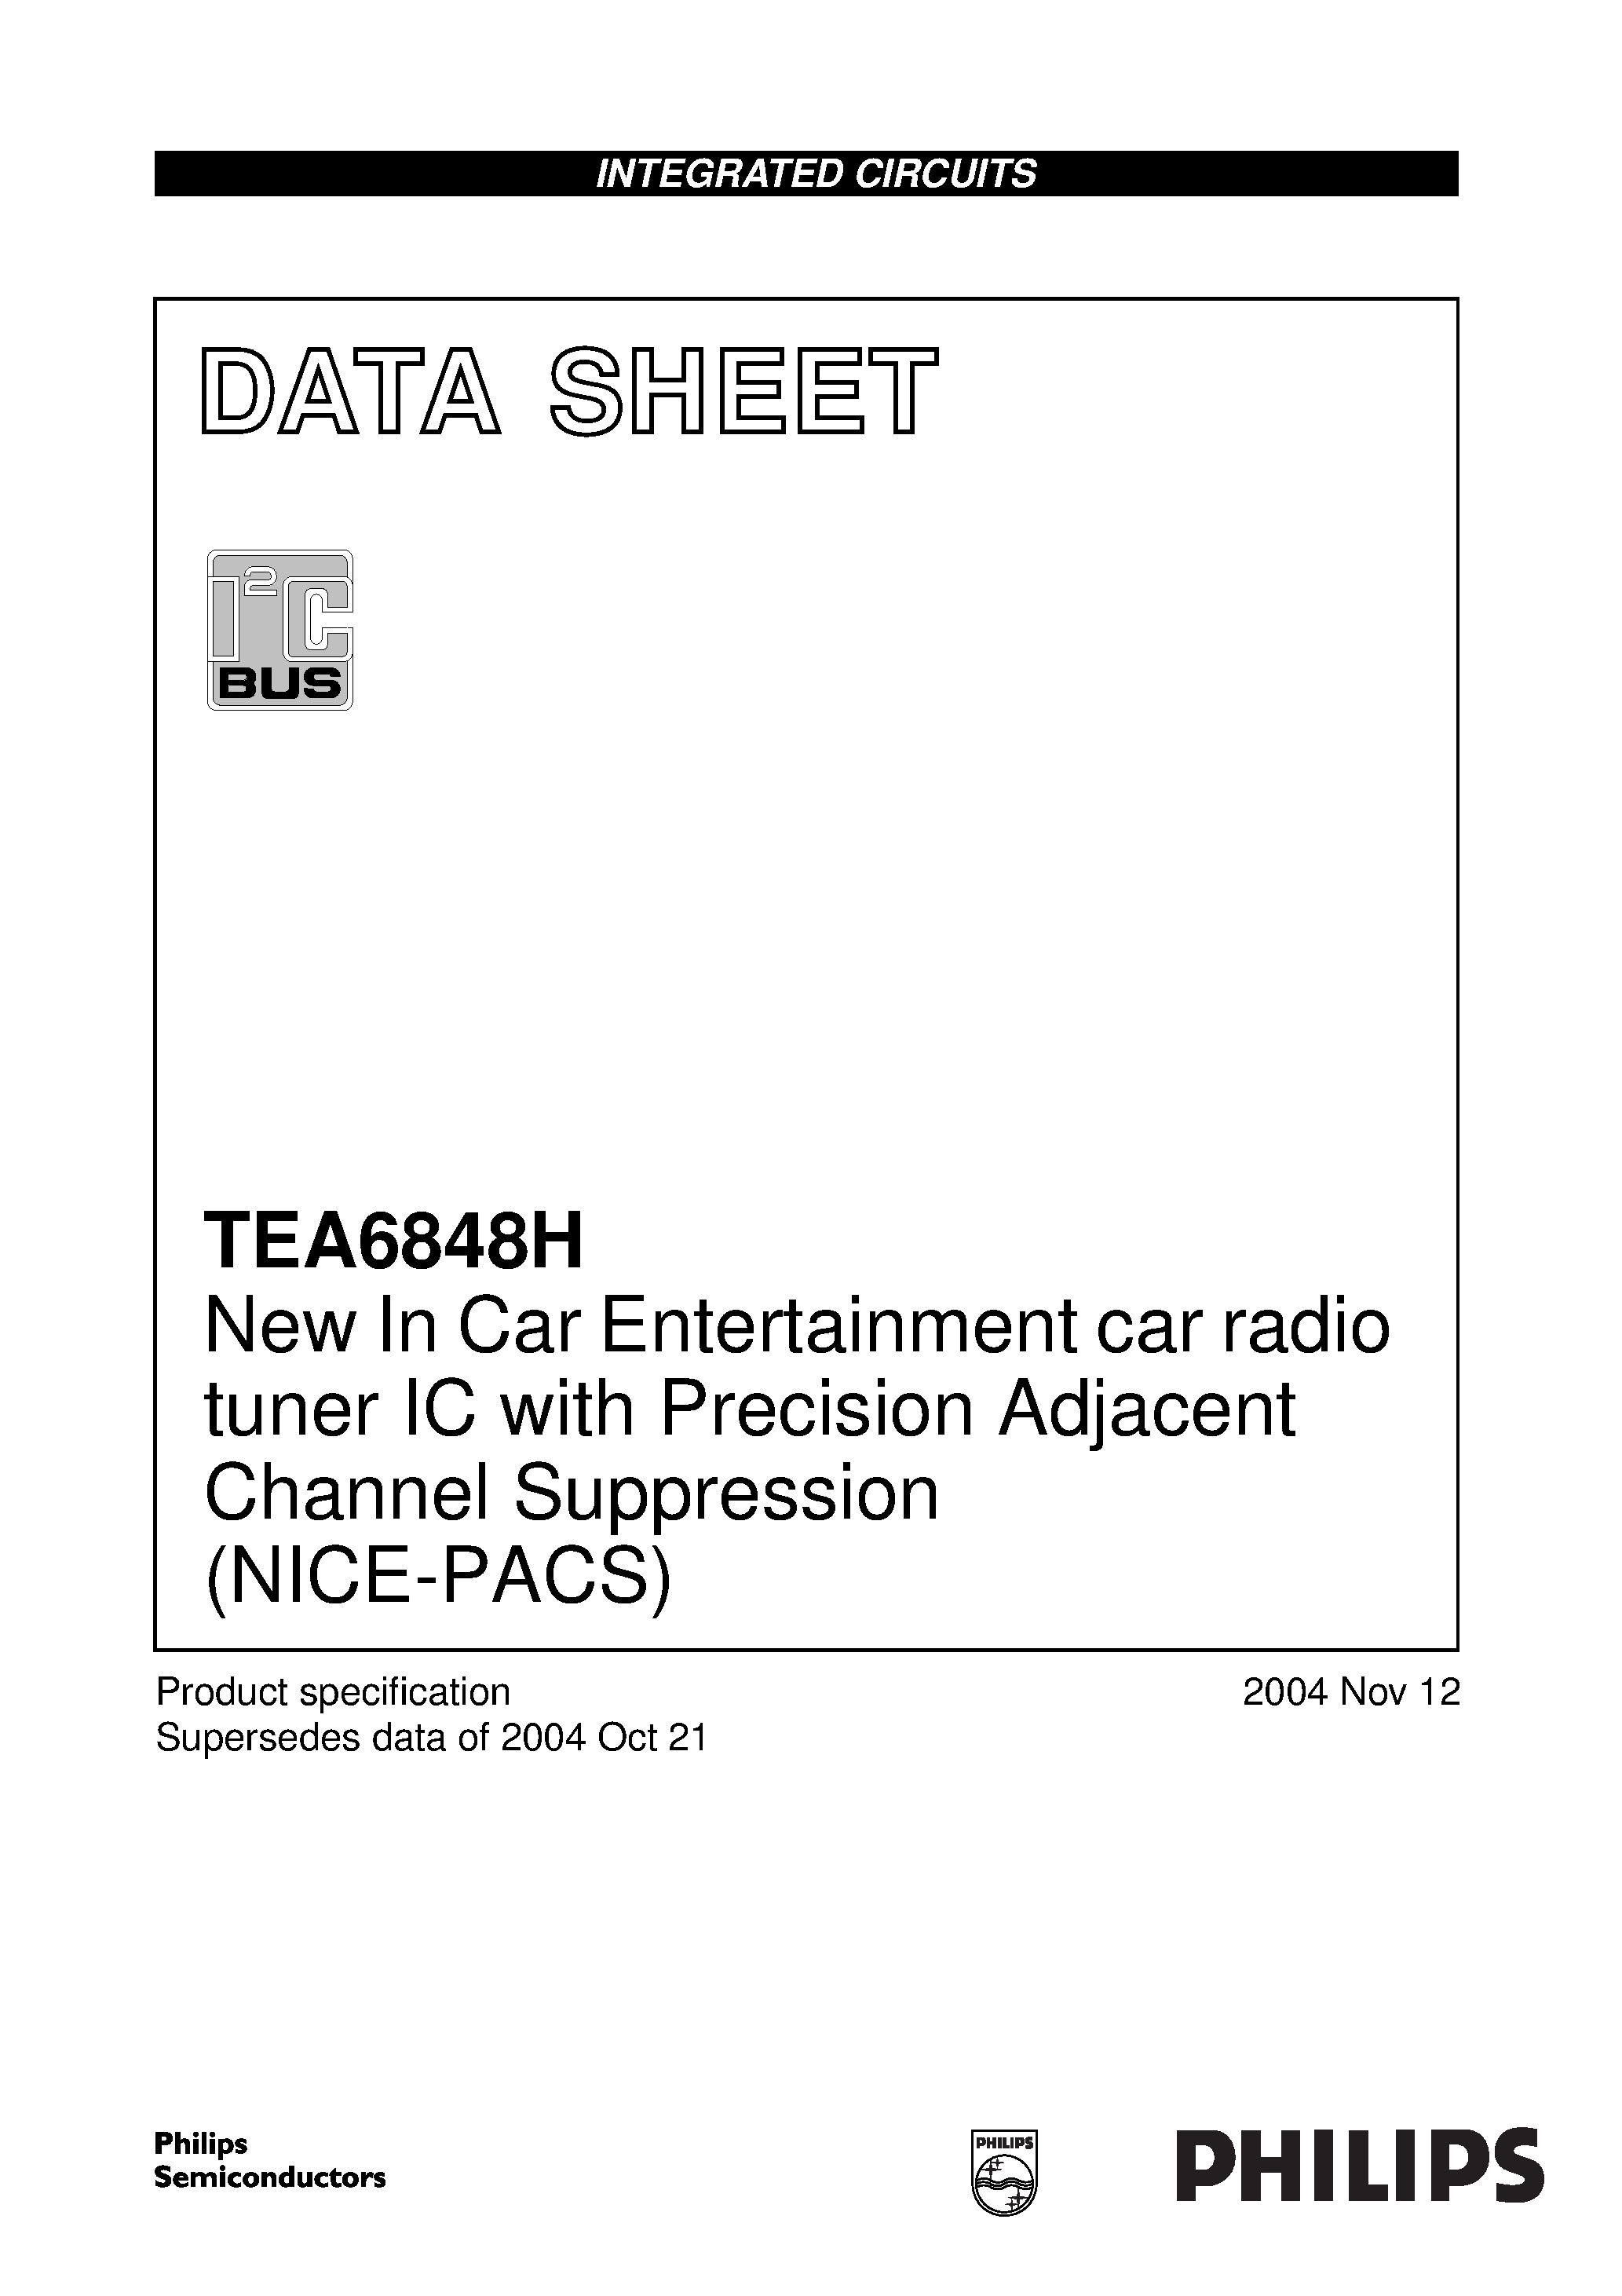 Даташит TEA6848H - New In Car Entertainment car radio tuner IC with Precision Adjacent Channel Suppression страница 1